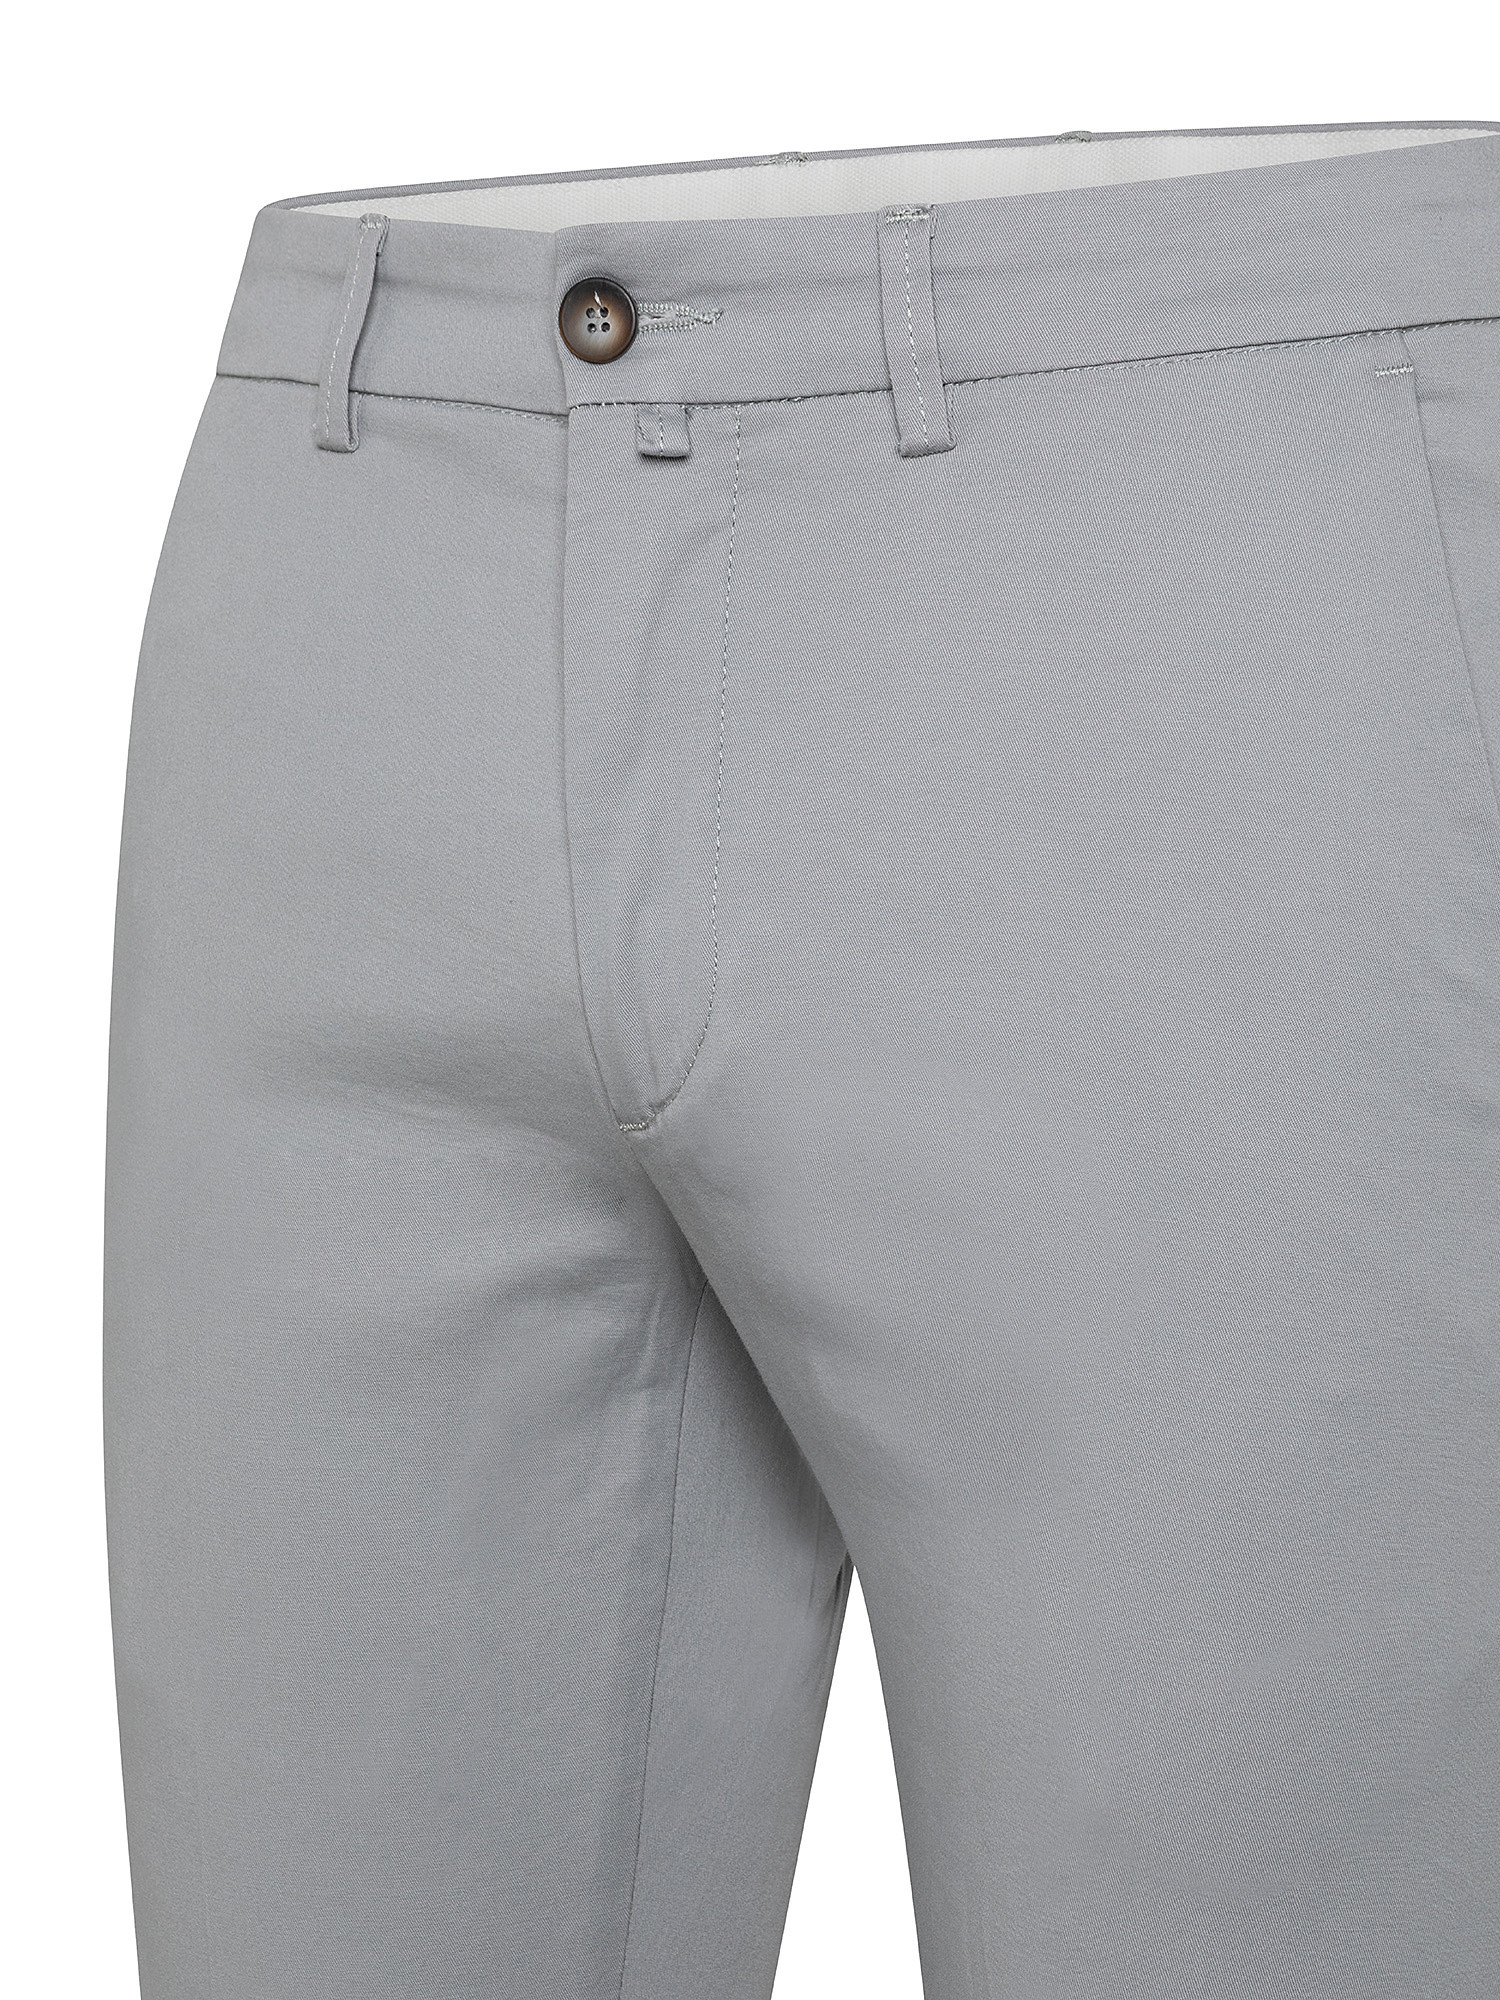 Chino trousers, Grey, large image number 2